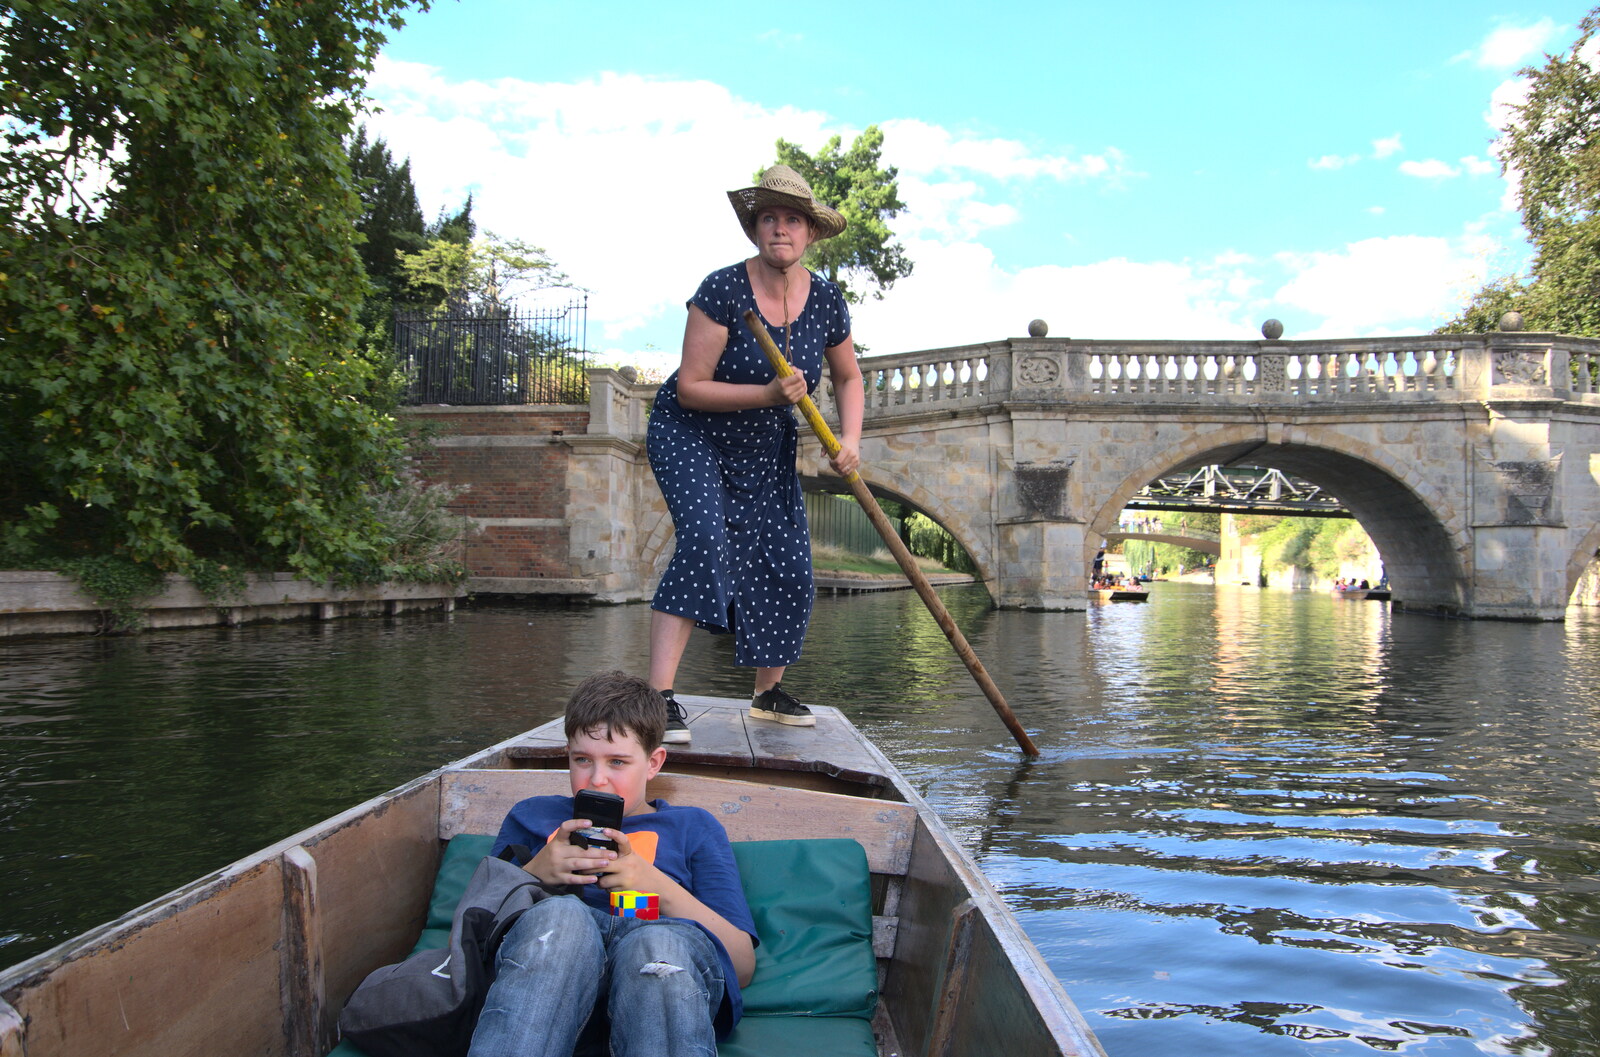 Isobel does a spot of punting from Anglesey Abbey and a #StandWithUkraine Demo, Cambridge - 24th August 2022